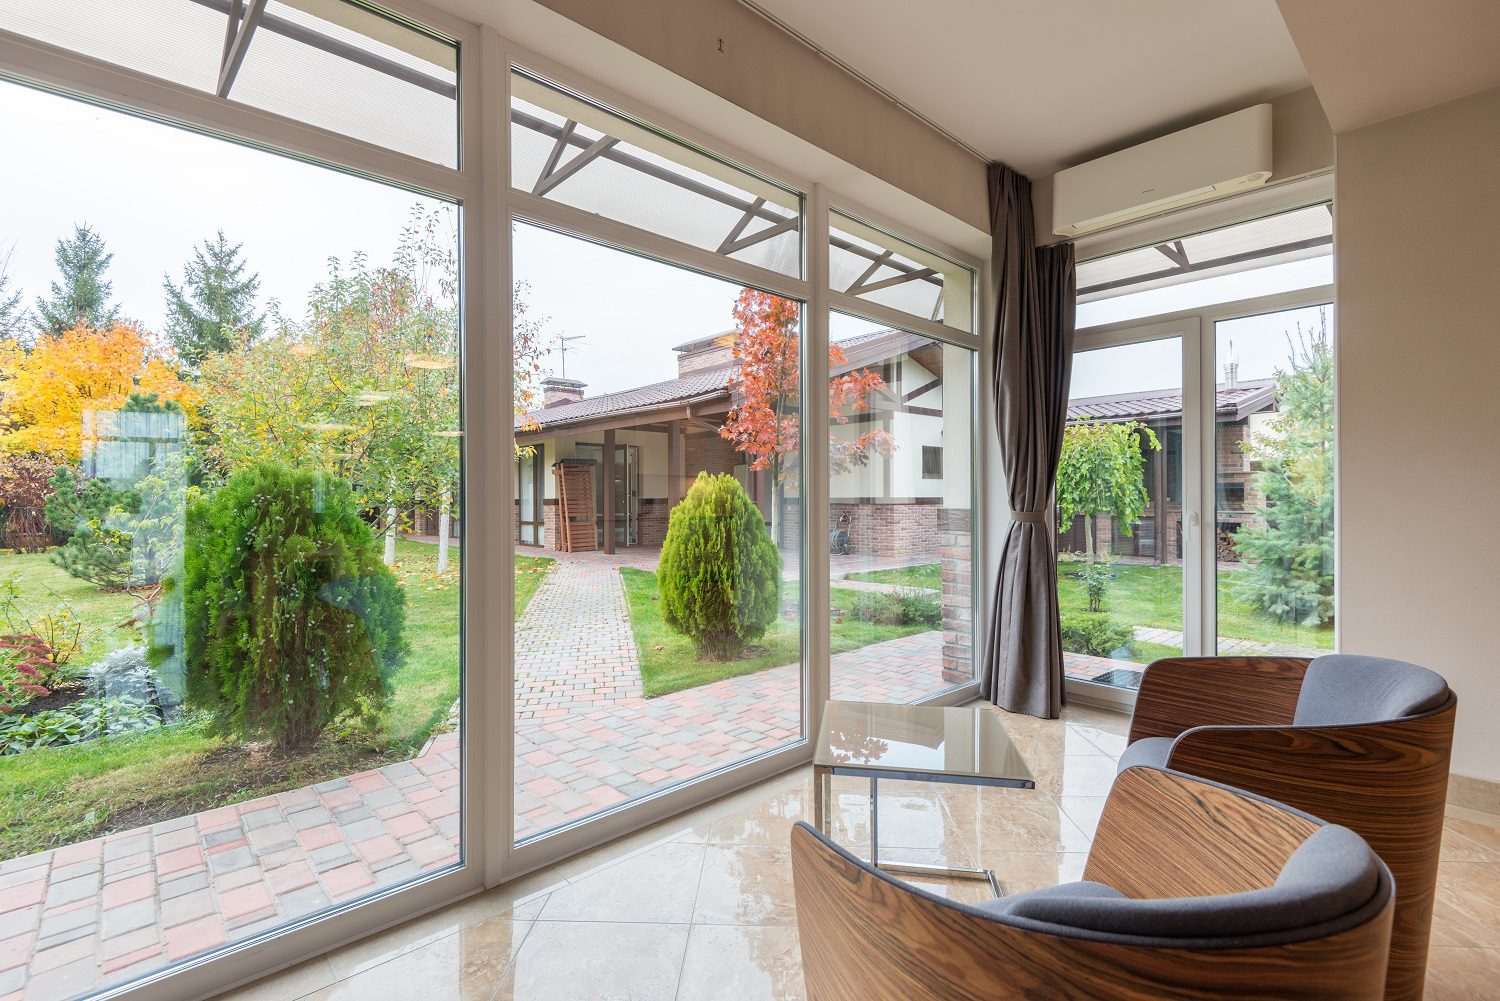 How to Choose the Best Sliding Patio Door for Enhancing the Decor of Your Home